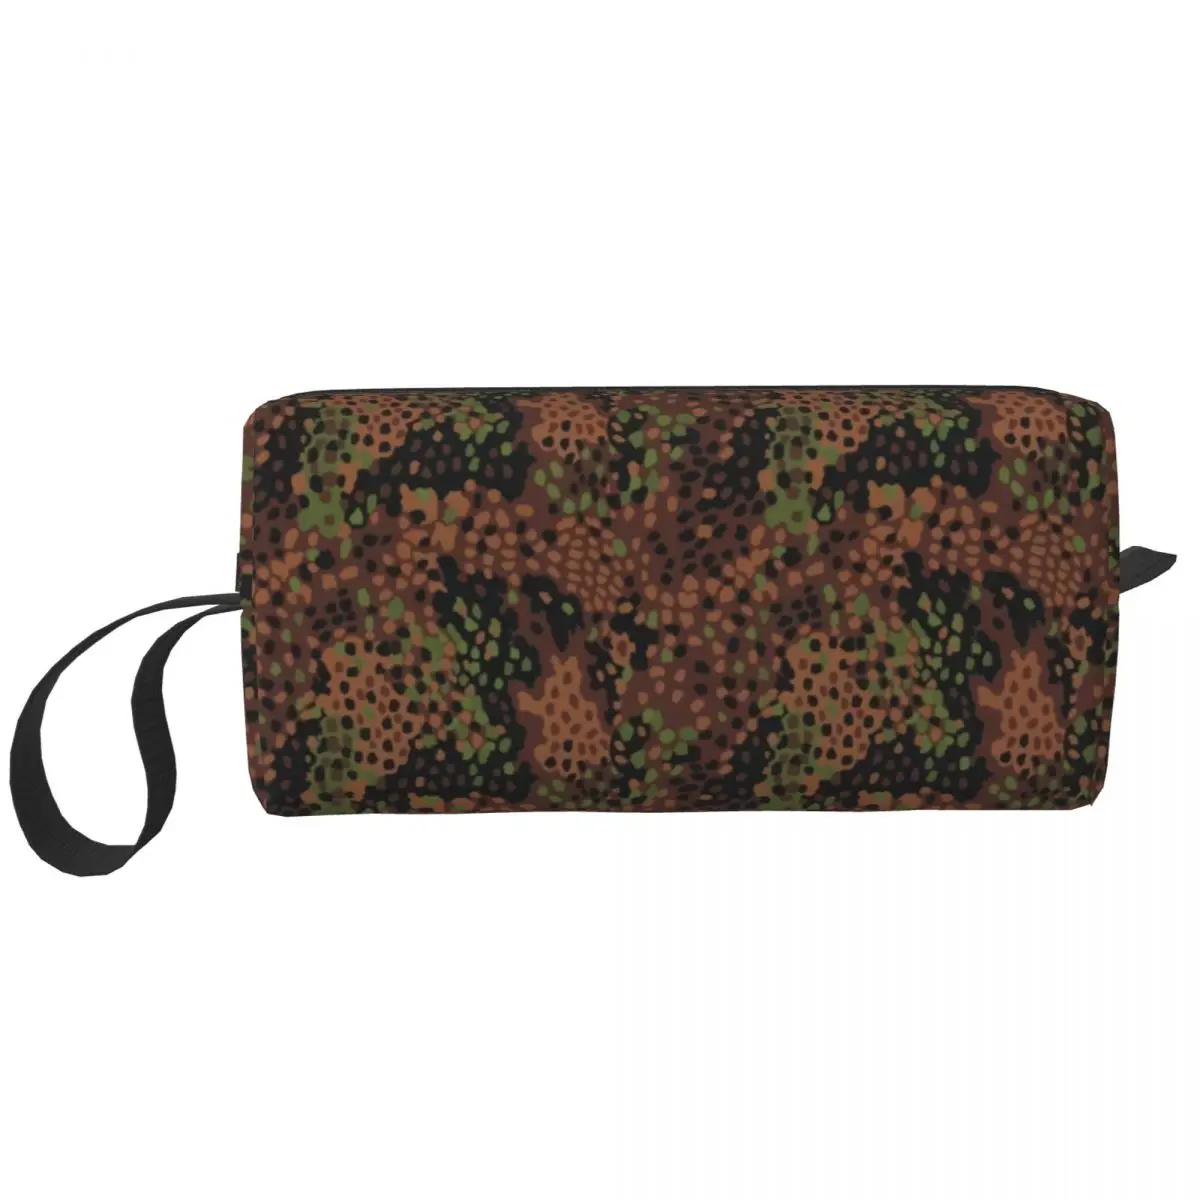 

Erbsenmuster Pea Dot German Camo Makeup Bag for Travel Cosmetic Organizer Kawaii Military Army Camouflage Storage Toiletry Bags